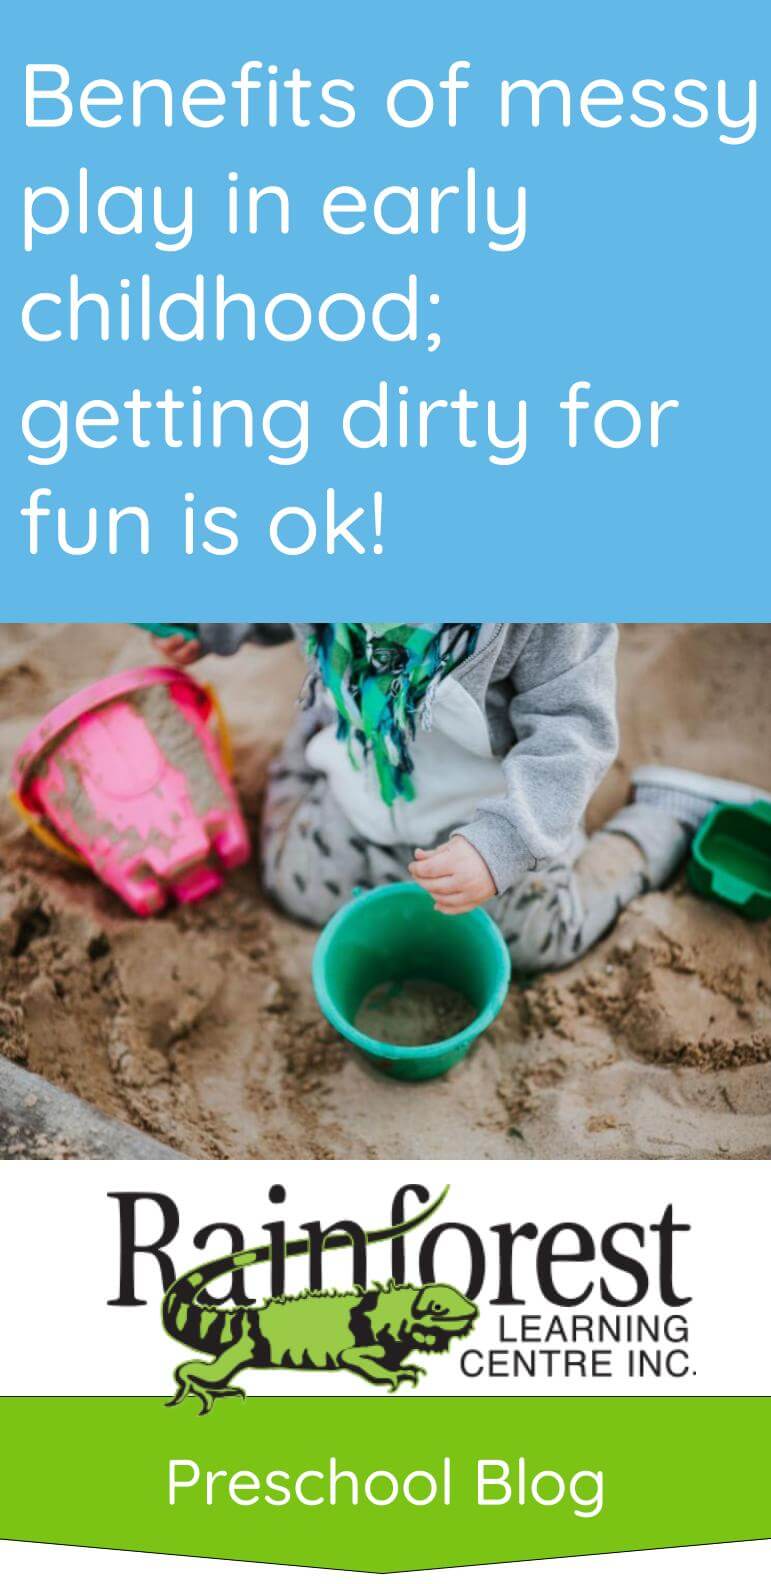 Benefits of messy play in early childhood - article Pinterest image